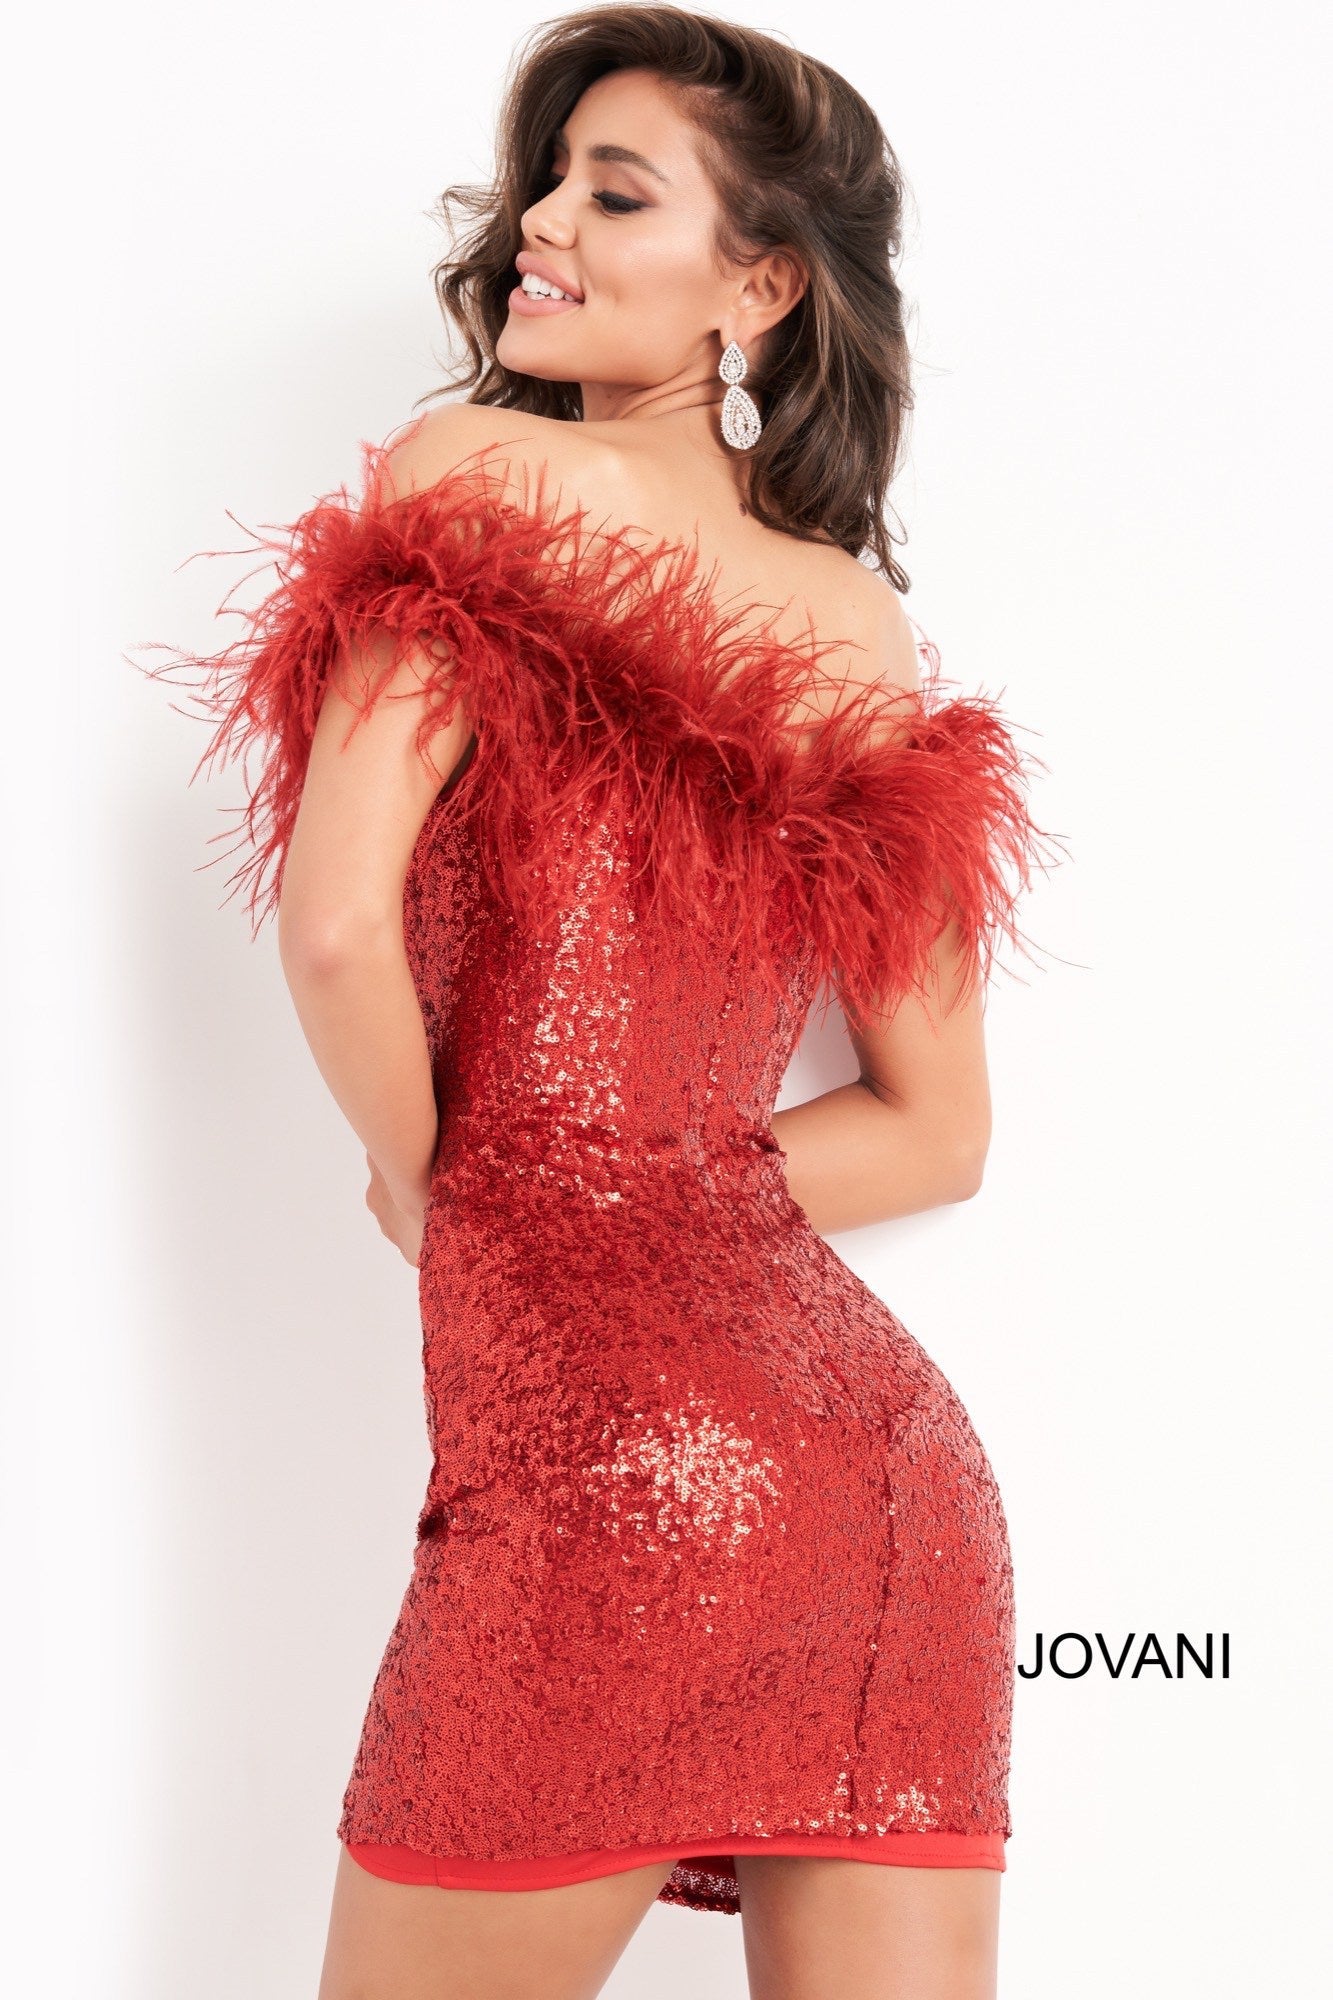 Jovani 06167 is a short fitted sequin cocktail evening dress. Featuring a straight neckline with off the shoulder feather embellished straps. Fitted Stretch Sequin bodice is perfect for any formal event or occasion! Sexy wedding reception dress in Ivory or Little black dress.  Available Sizes: 00,0,2,4,6,8,10,12,14,16,18,20,22,24  Available Colors: Black, Red, Ivory